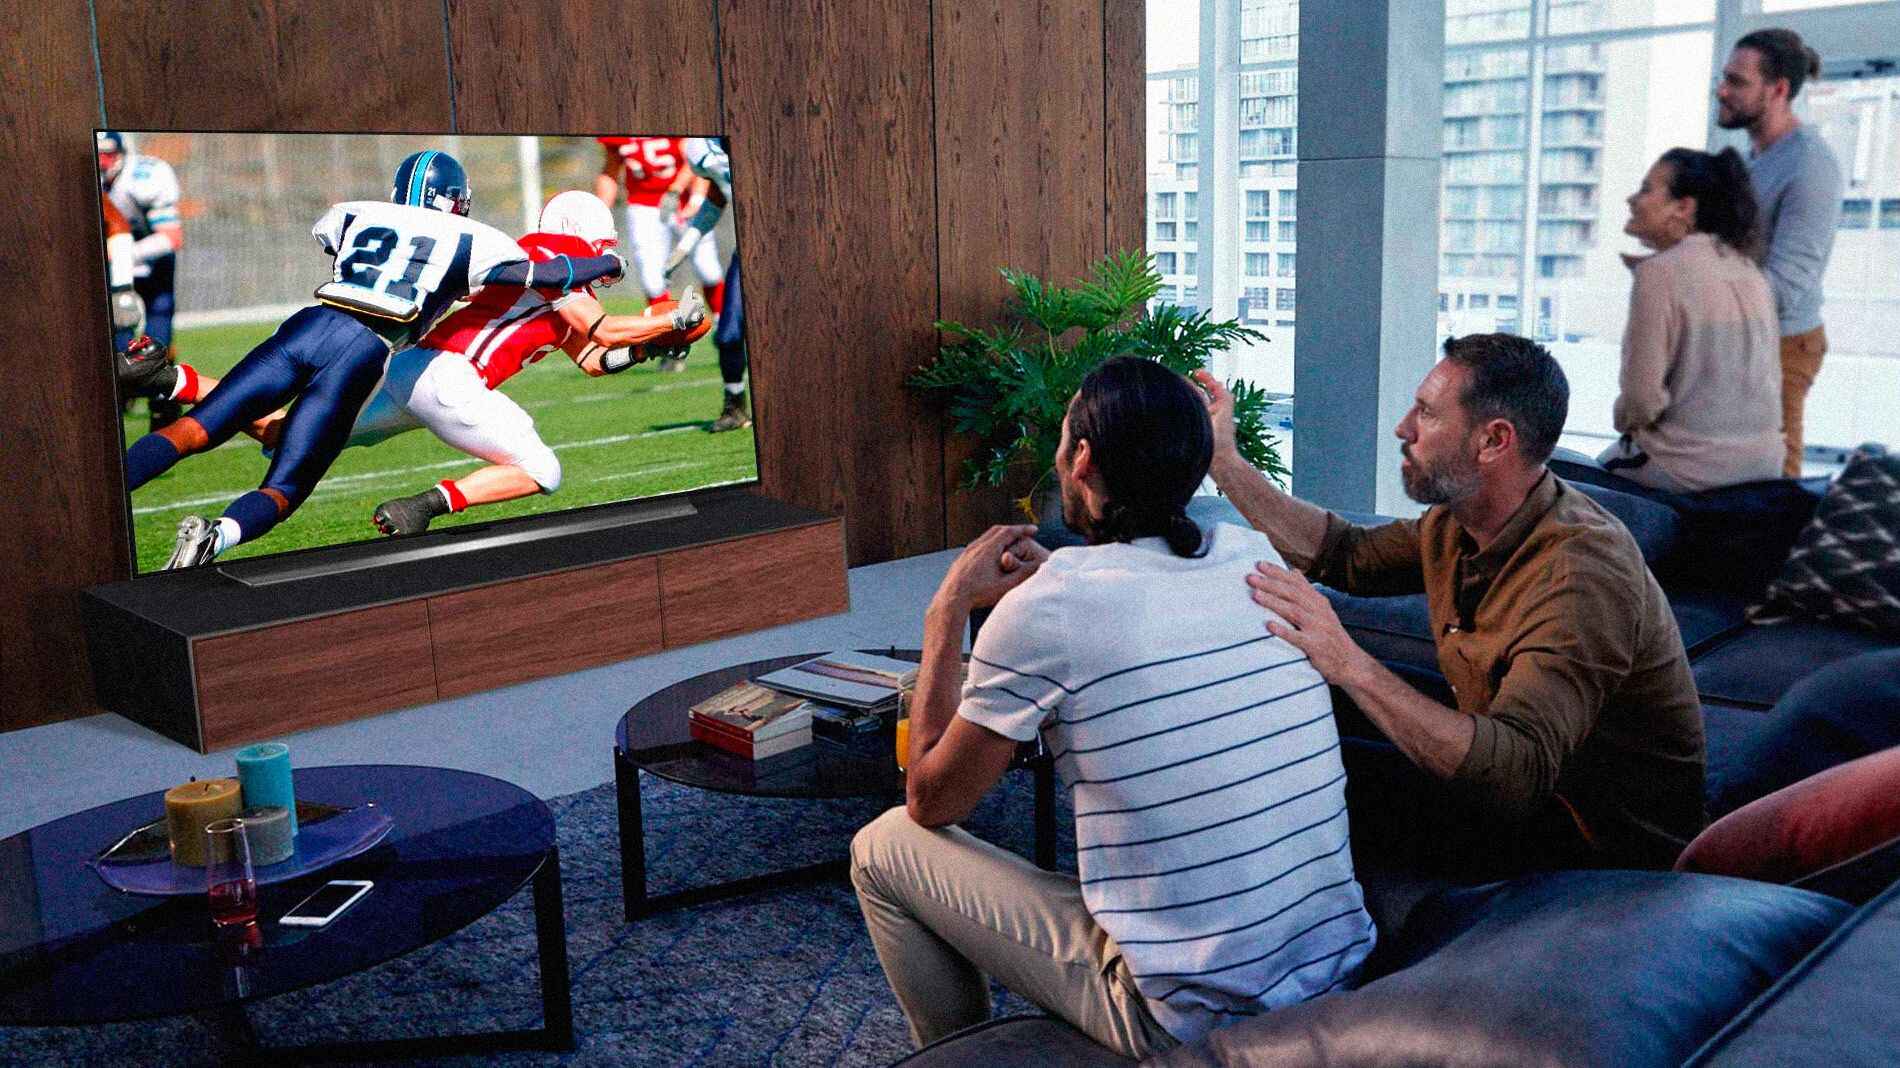 How To Watch Super Bowl On LG Smart TV